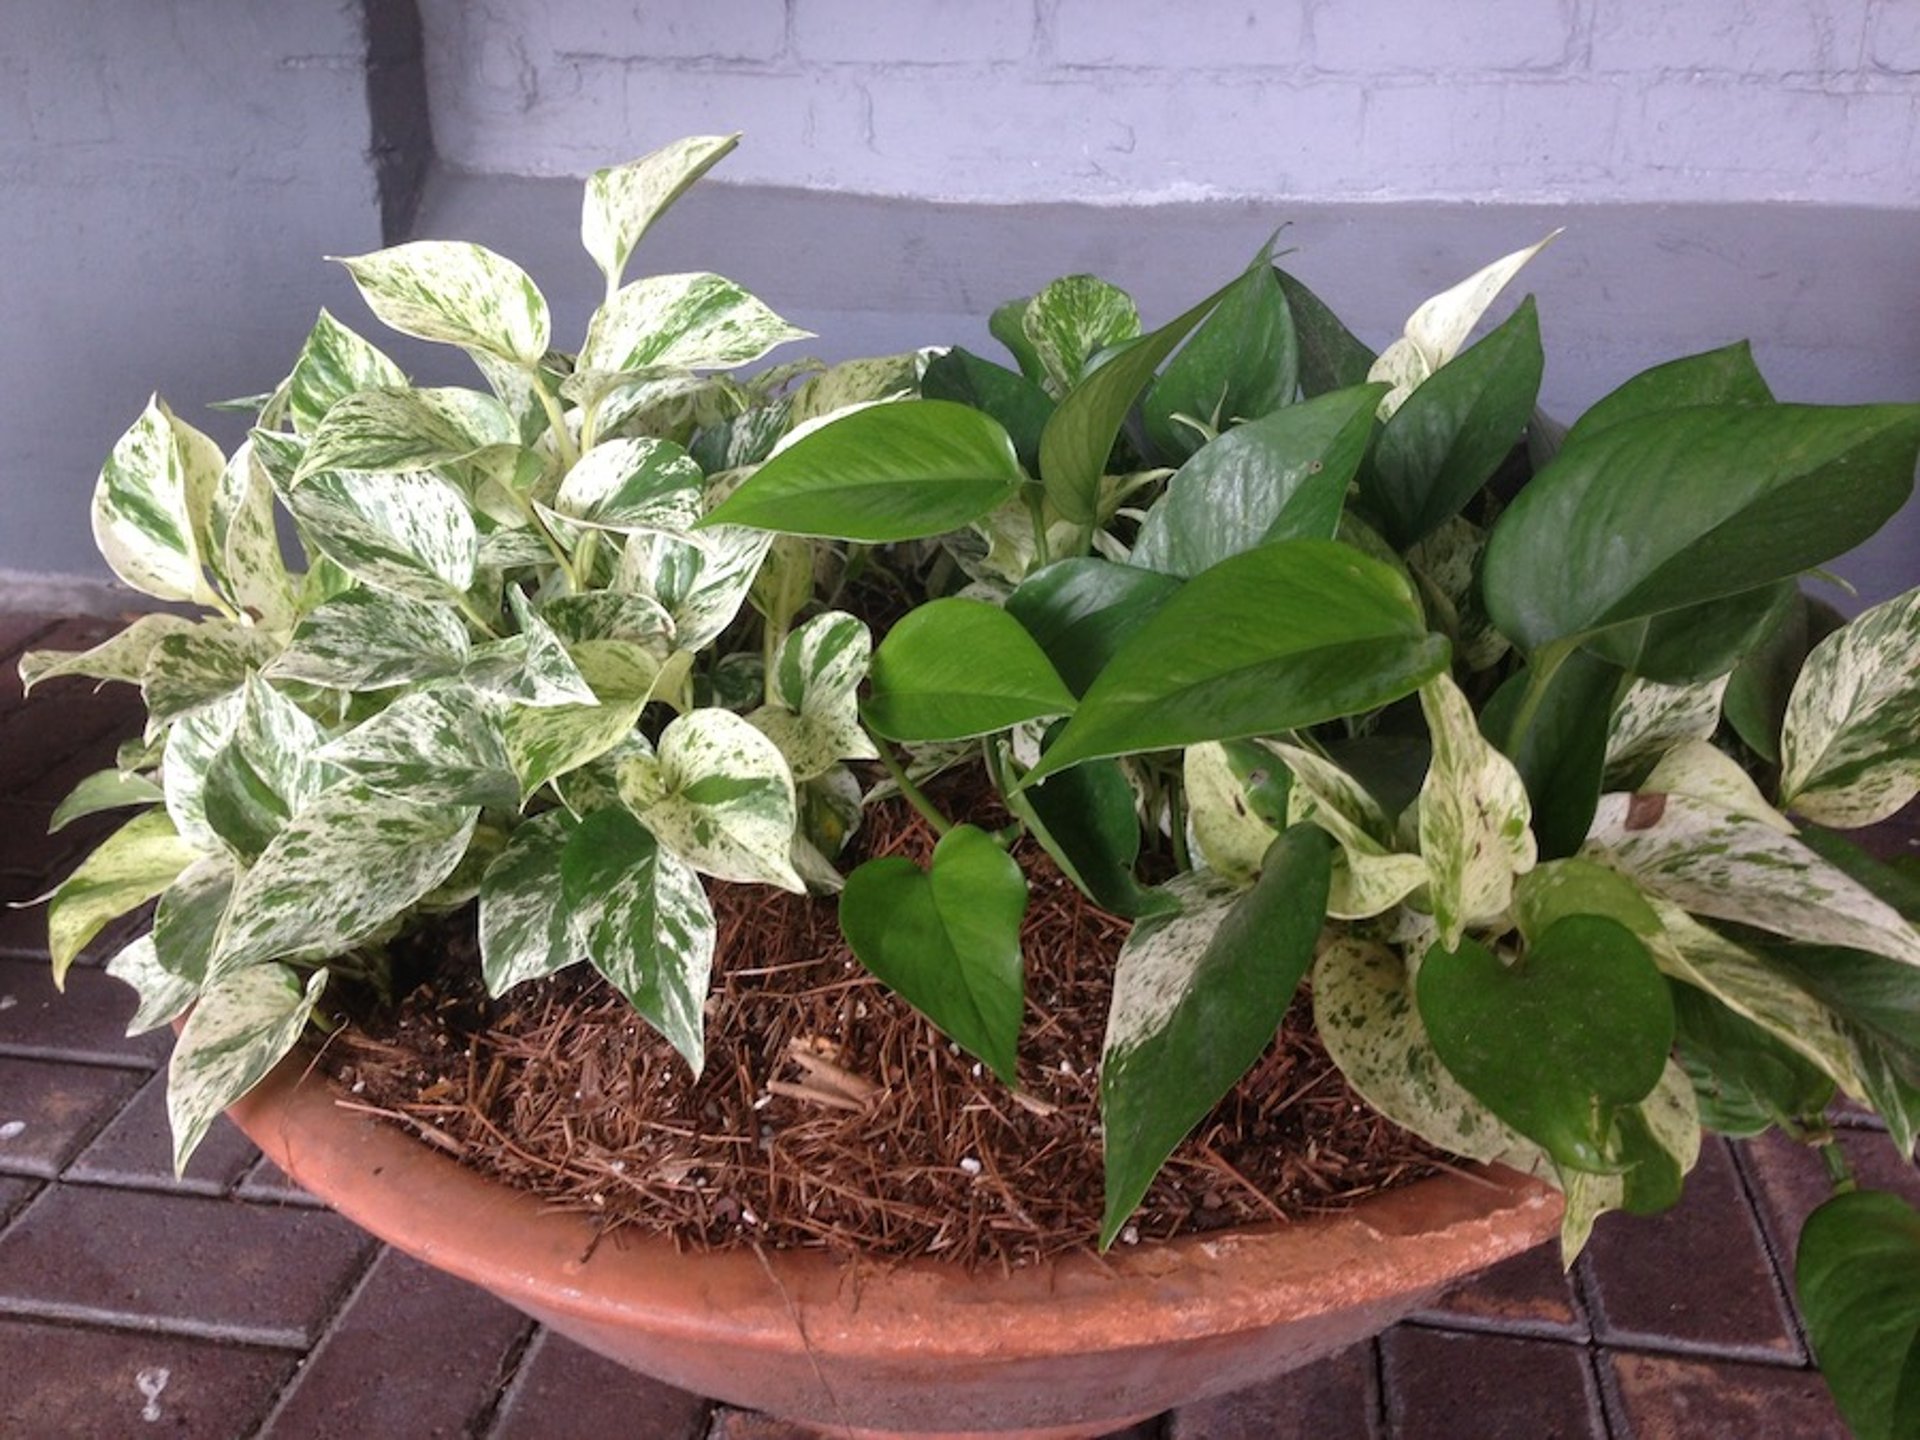 Philodendron vines <i >(Philodendron</i> spp)